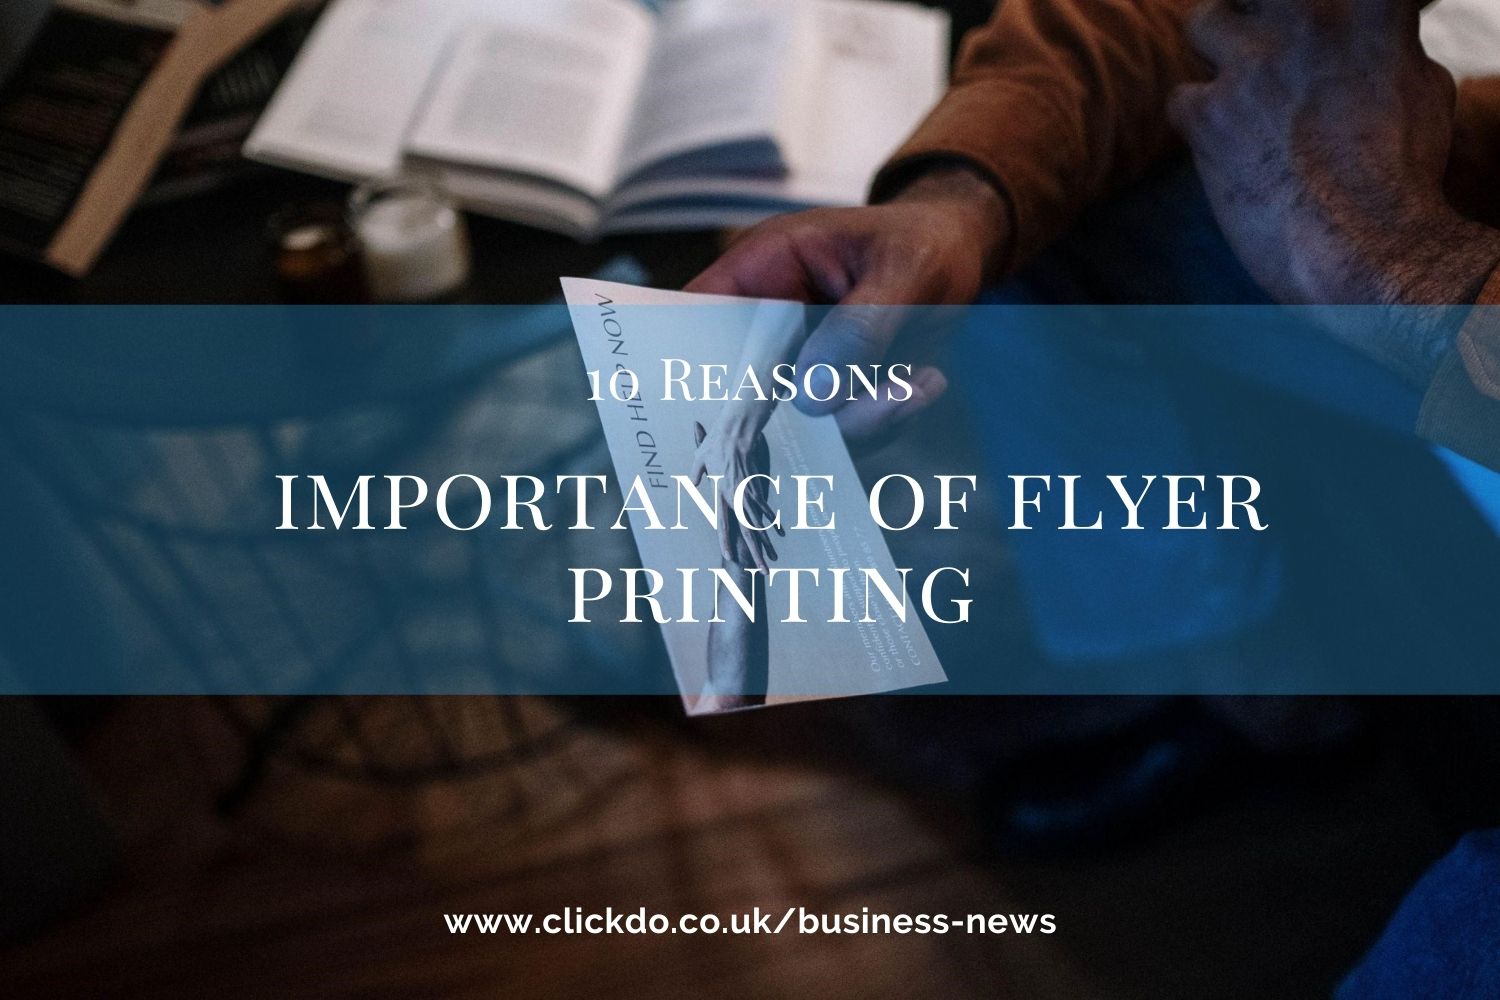 10 Reasons Why Flyer Printing is Important for Your Business